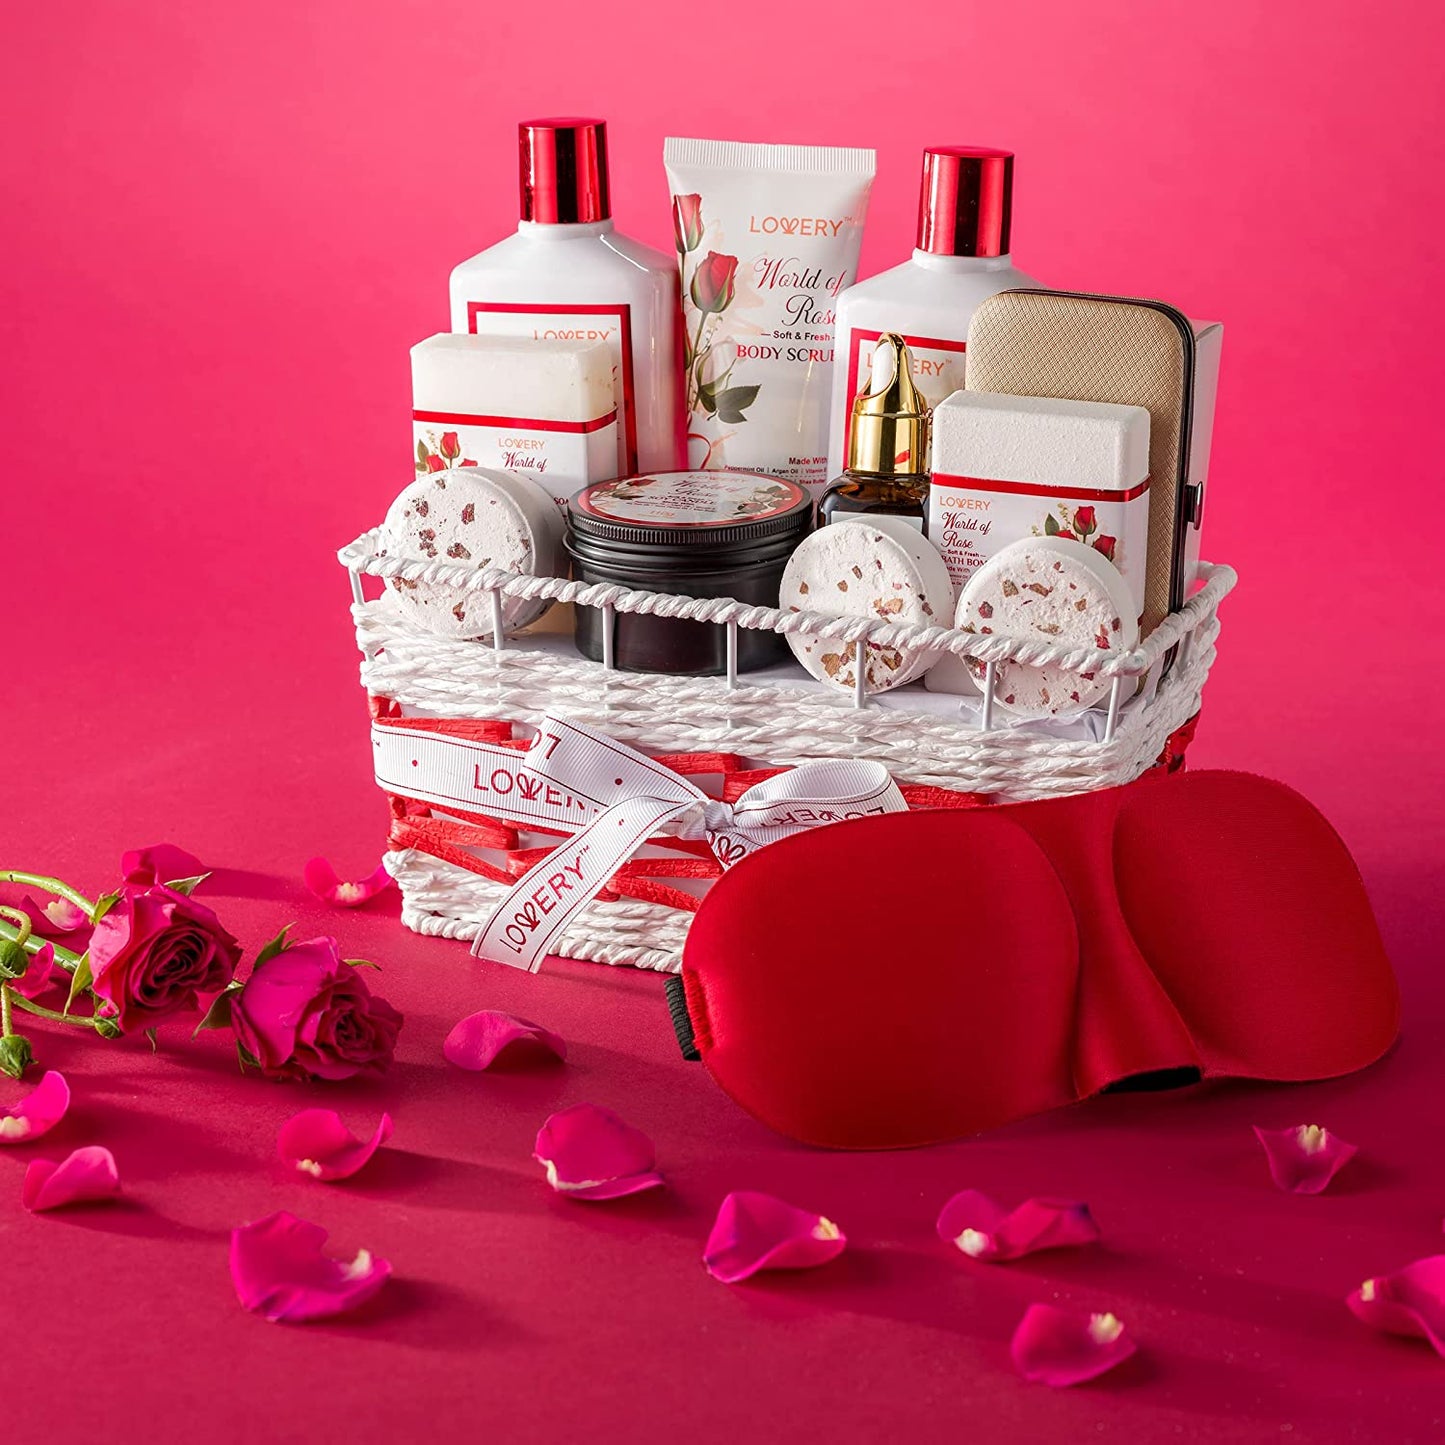 Red Rose Spa, Red Rose Spa Basket, Lovery Red Rose Spa, Lovery Baskets, Red Rose Shower, Red Rose Lotion, Red Rose Soap, Red Rose Spa Kit, Red Rose Oil, Red Rose Flowers, Lovery Gift Baskets